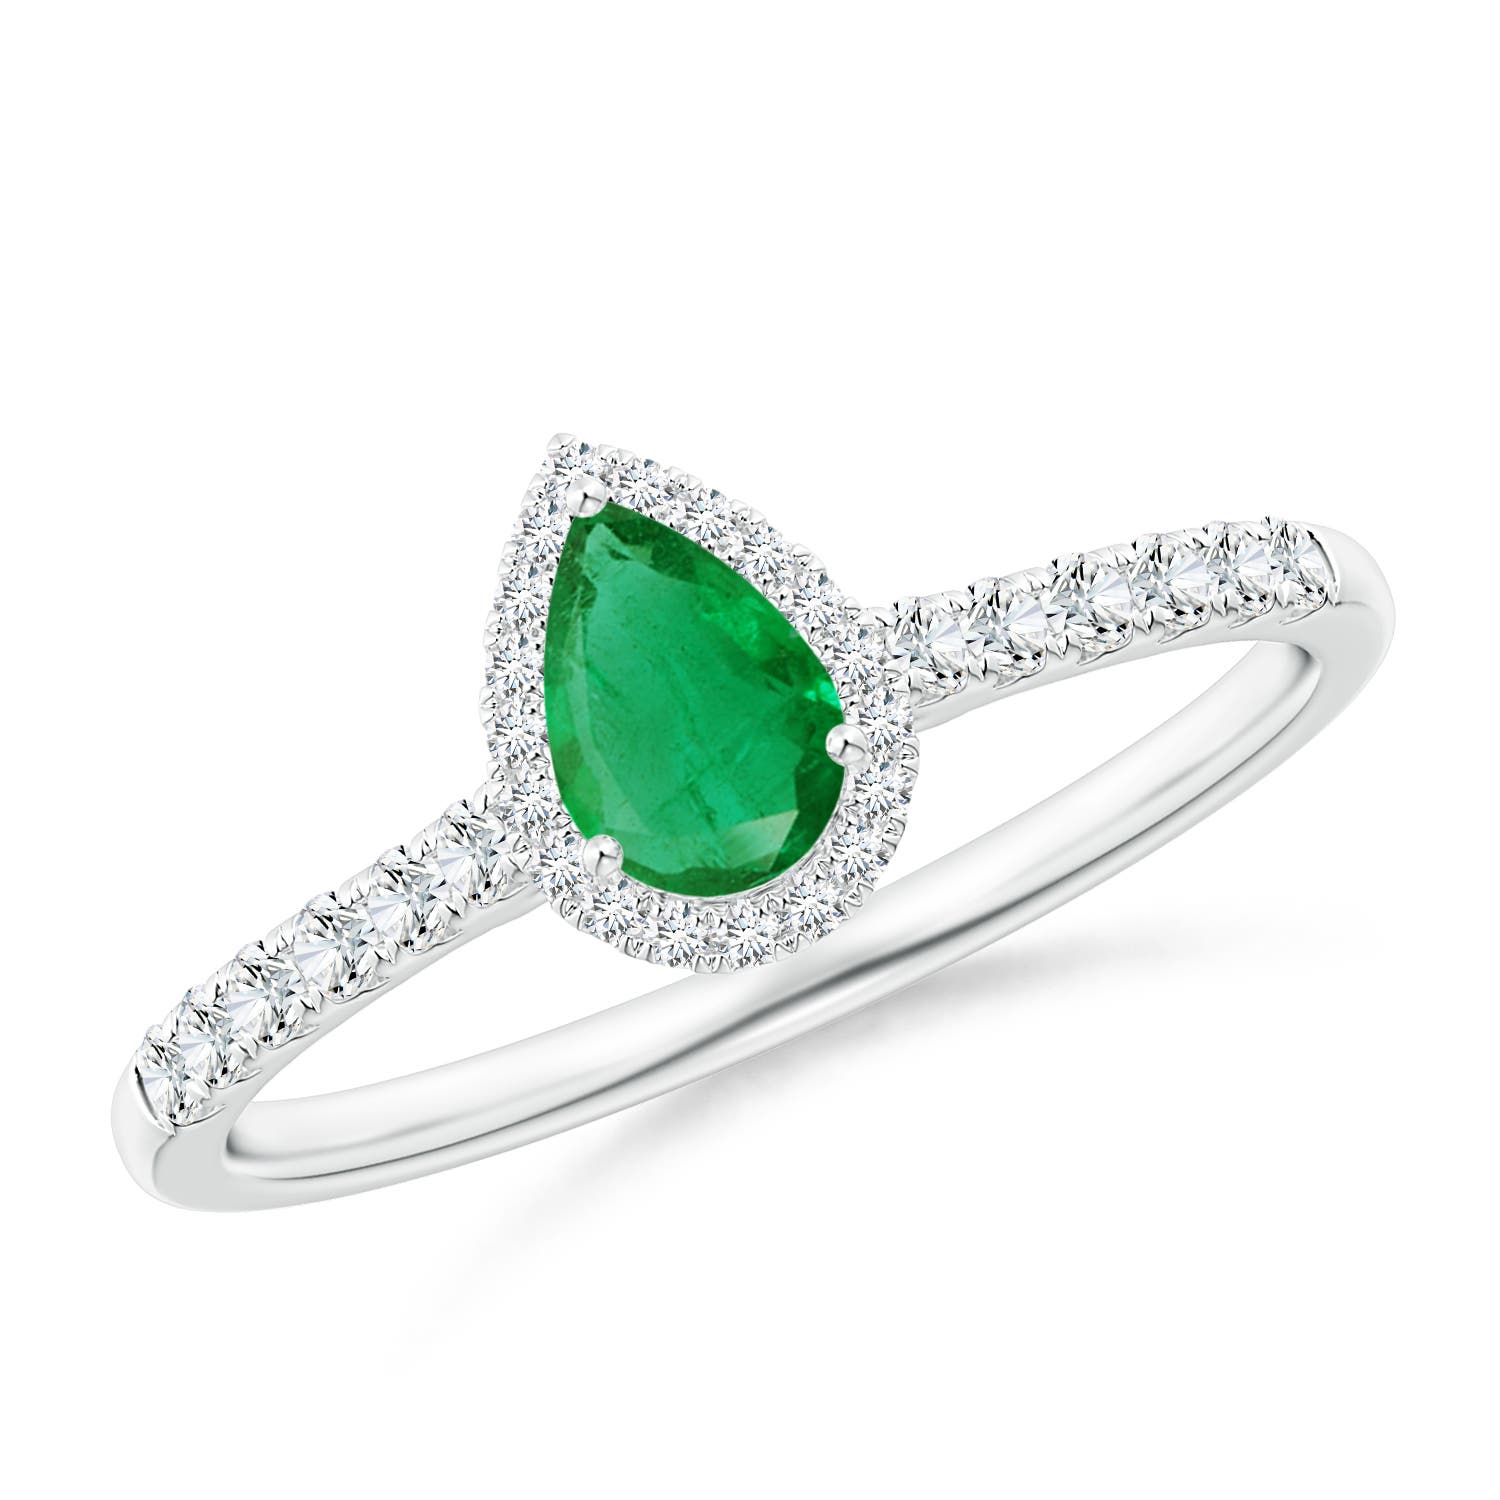 AA - Emerald / 0.56 CT / 14 KT White Gold